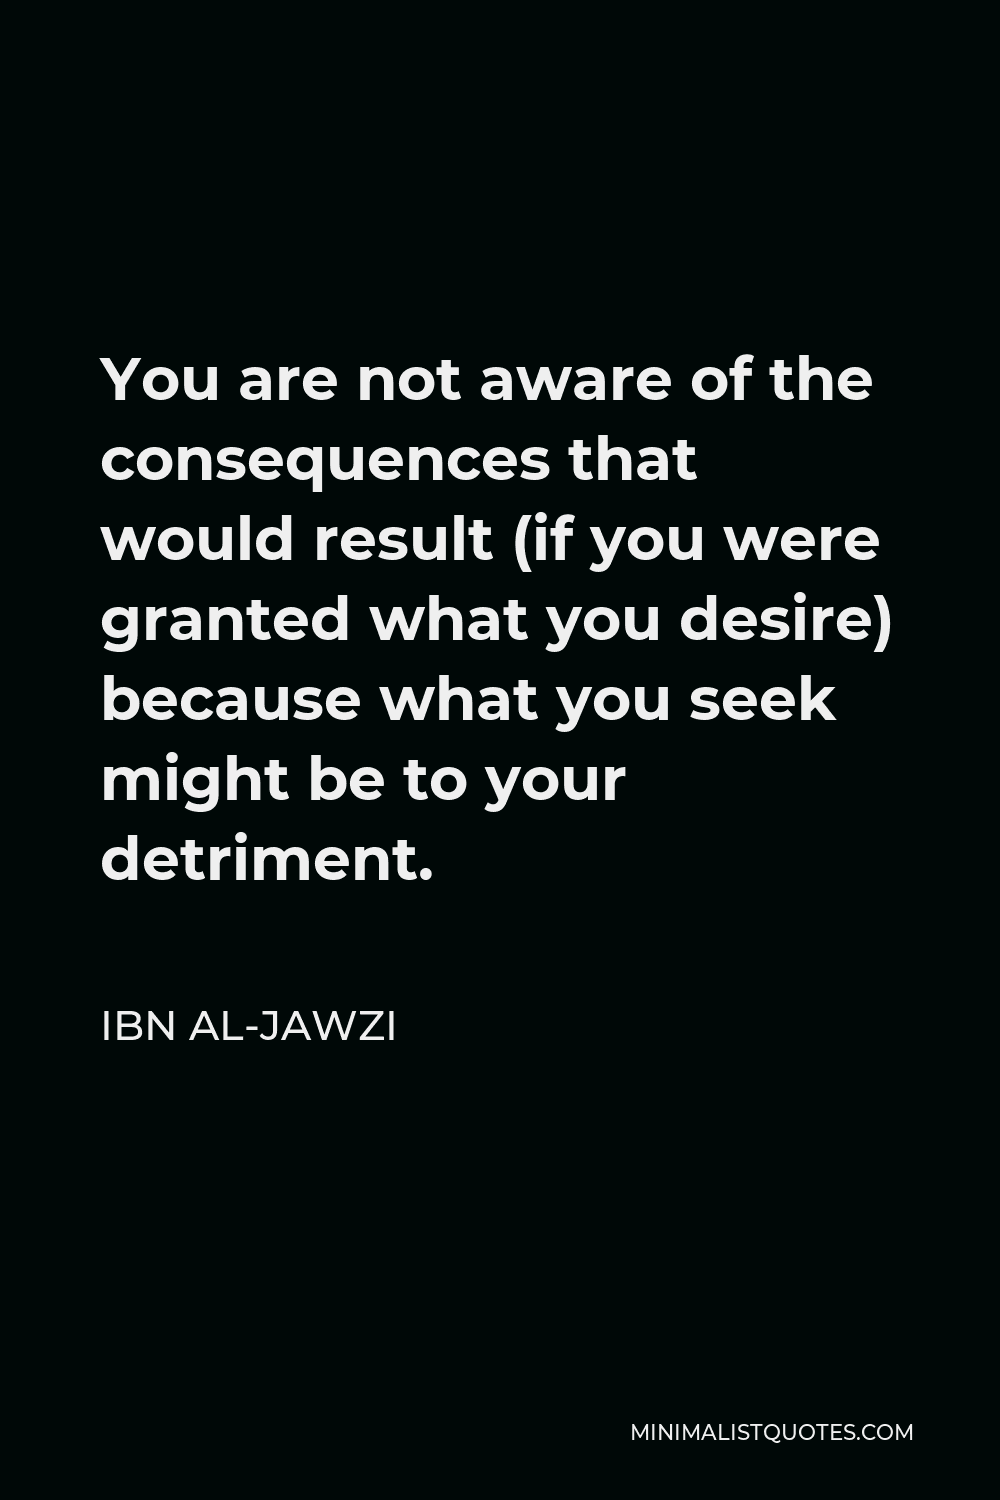 Ibn al-Jawzi Quote - You are not aware of the consequences that would result (if you were granted what you desire) because what you seek might be to your detriment.